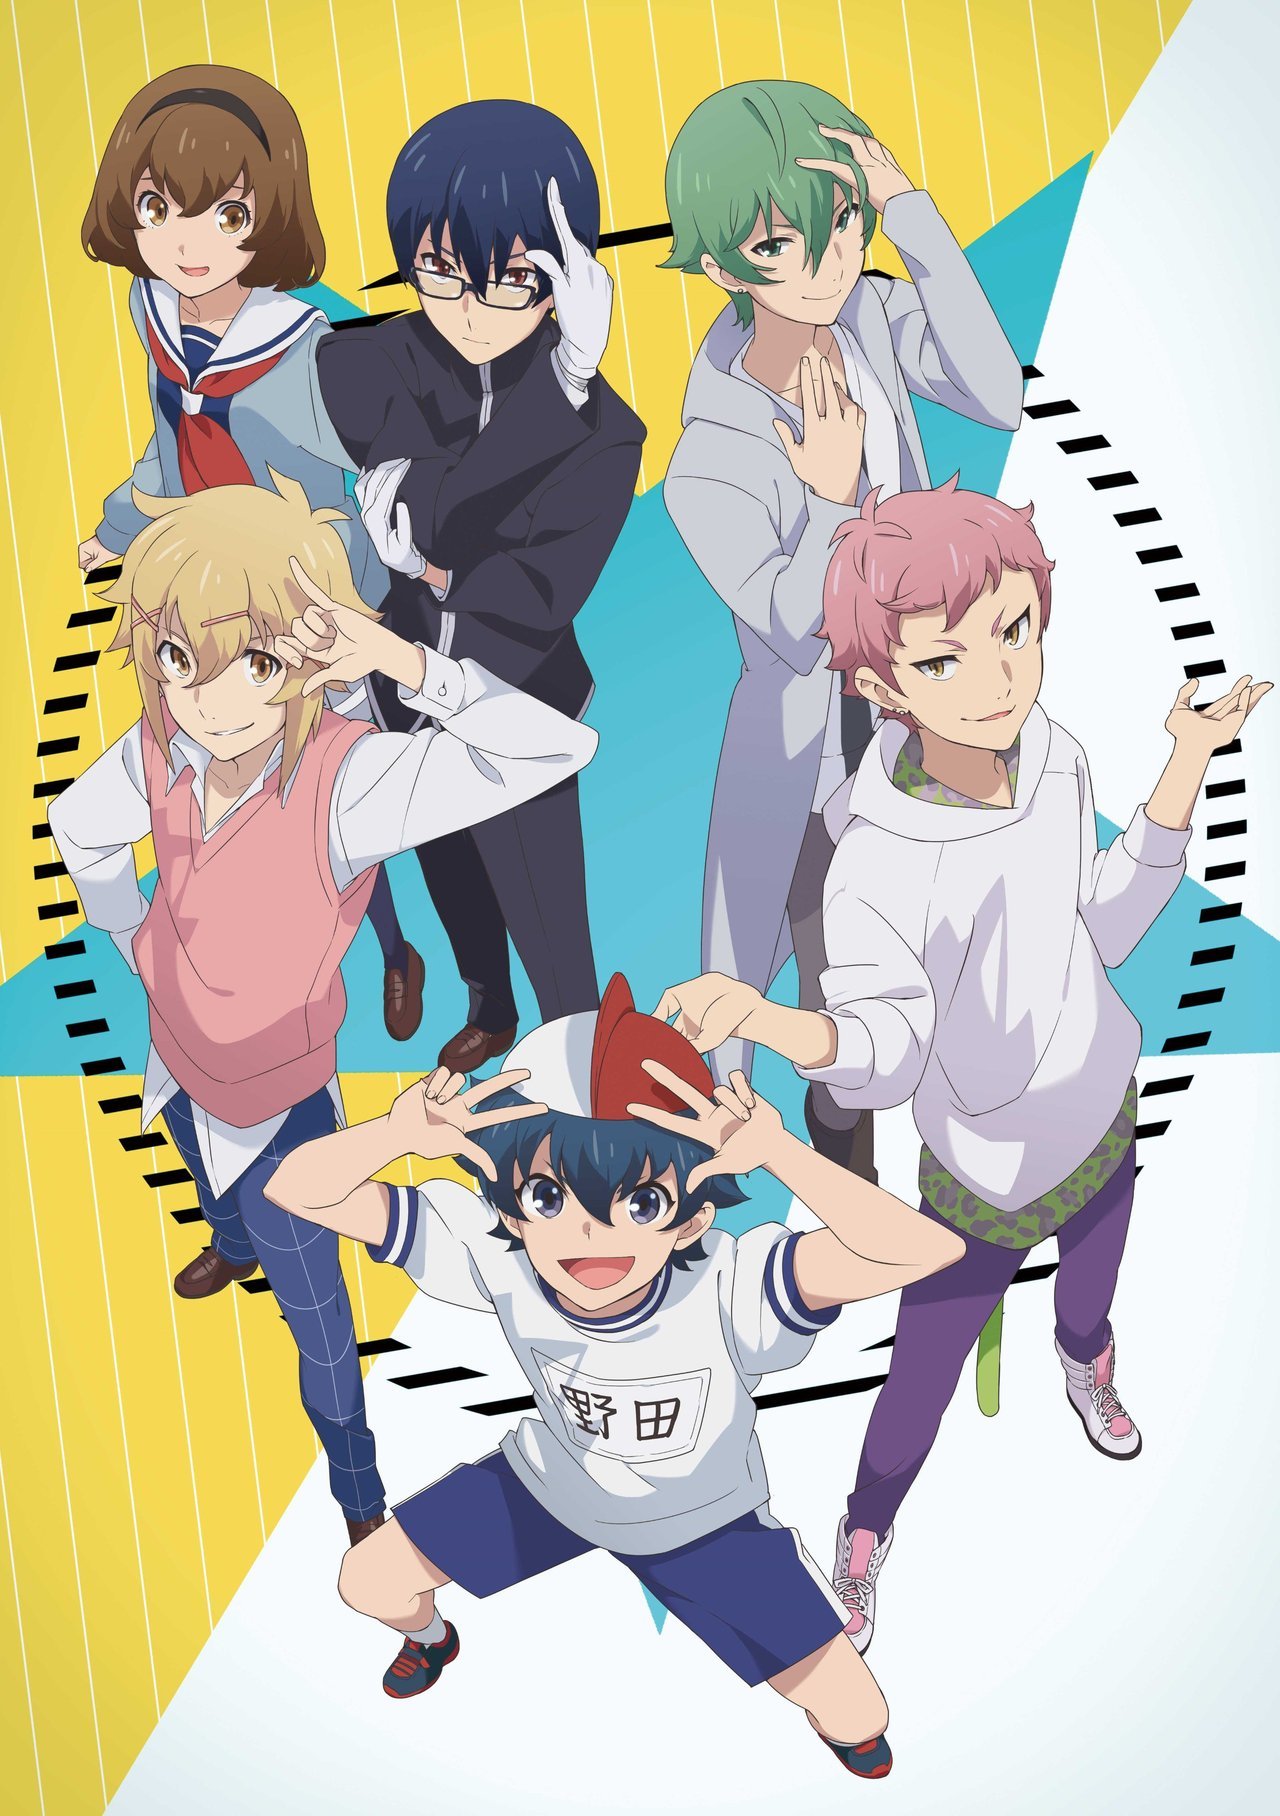 The official website for the âChuubyou Gekihatsu Boyâ (Middle Schooler Disease Outburst Boy) TV anime has launched. Itâll be produced by Studio Deen. -Synopsis-ââI Accidentally Woke Up!â- Mizuki Hijiri is a high school girl who transferred in the...